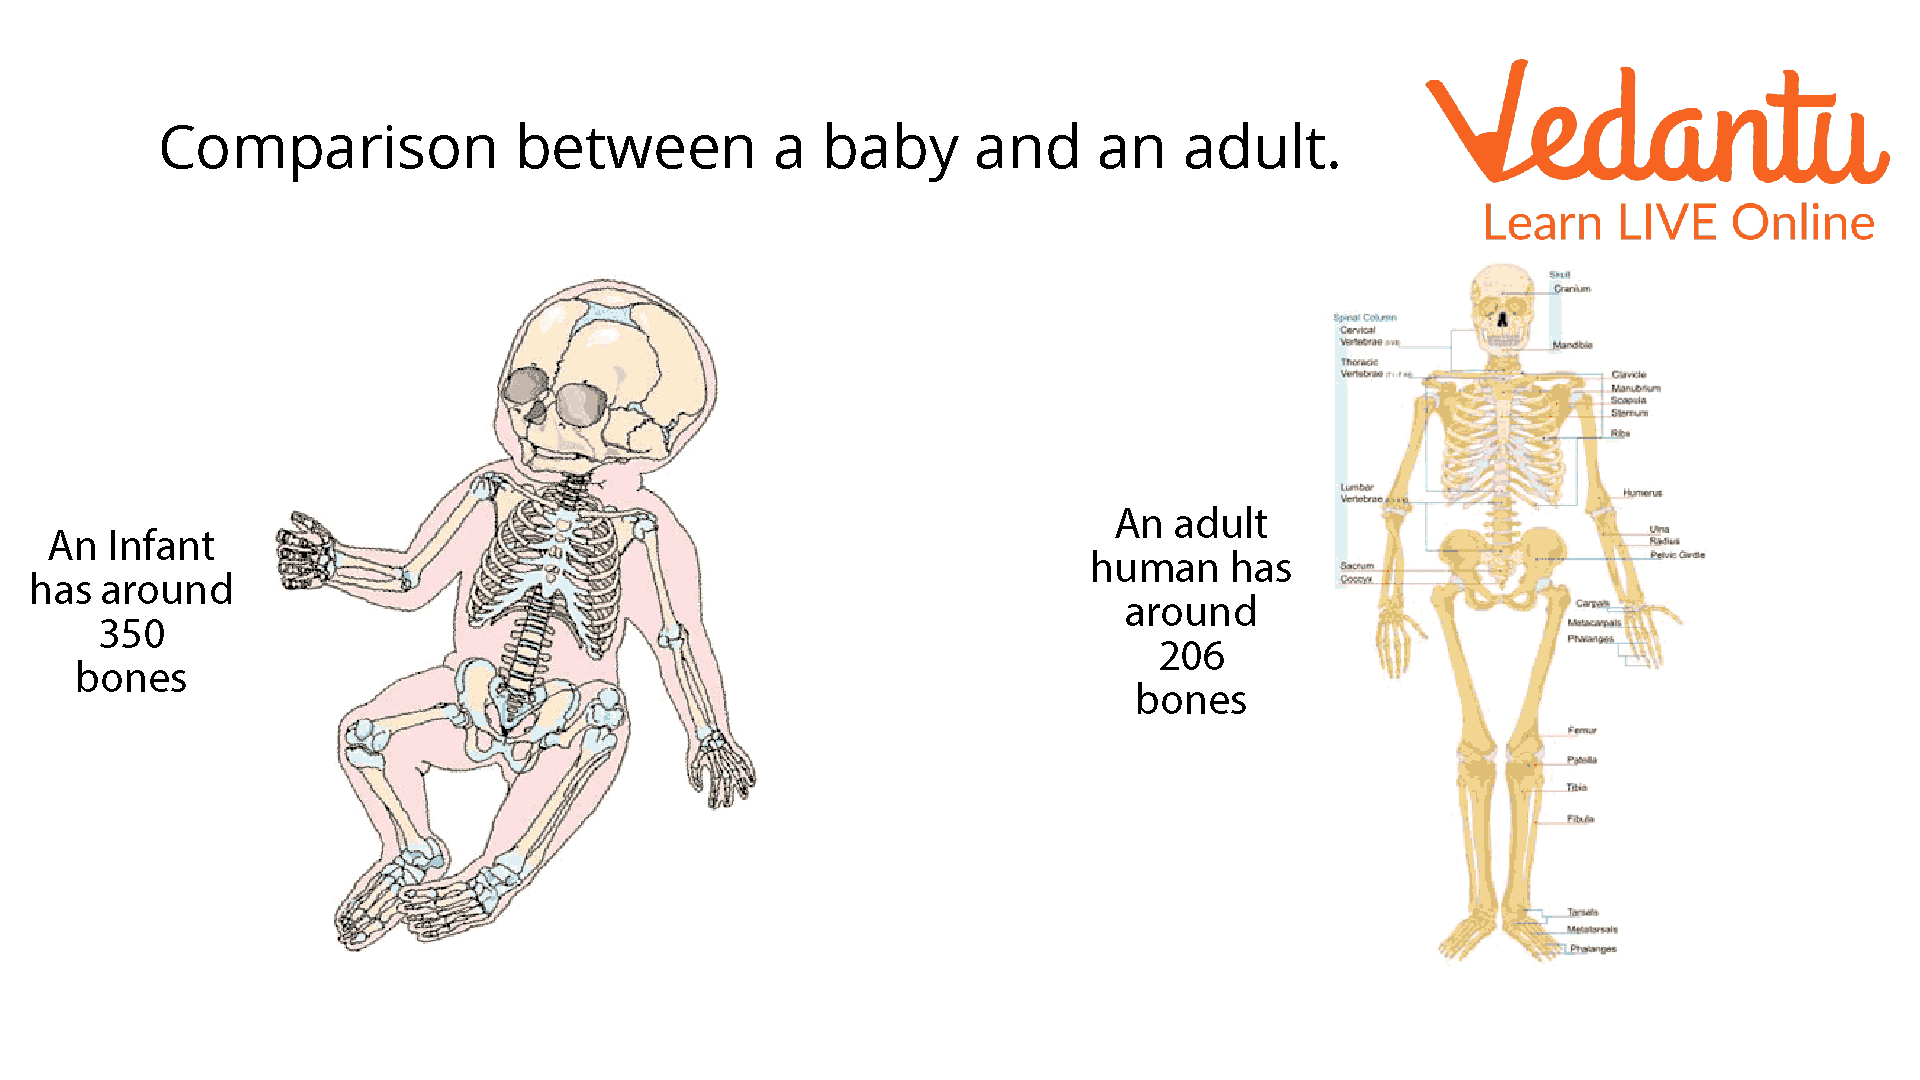 Comparison Between a Baby and an Adult